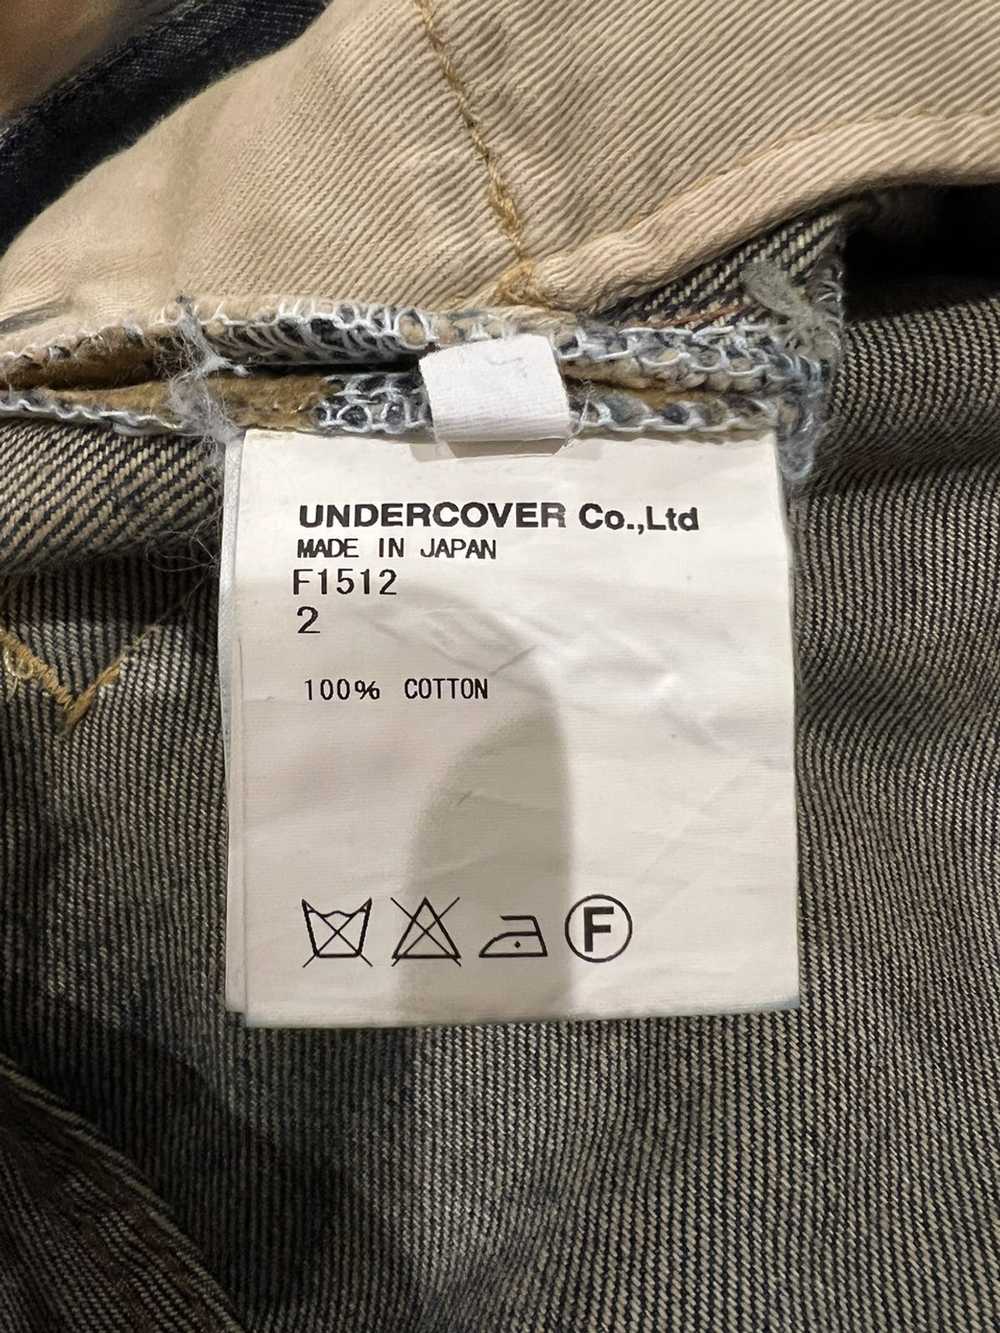 Undercover Undercover Printed Denim Jeans - image 7